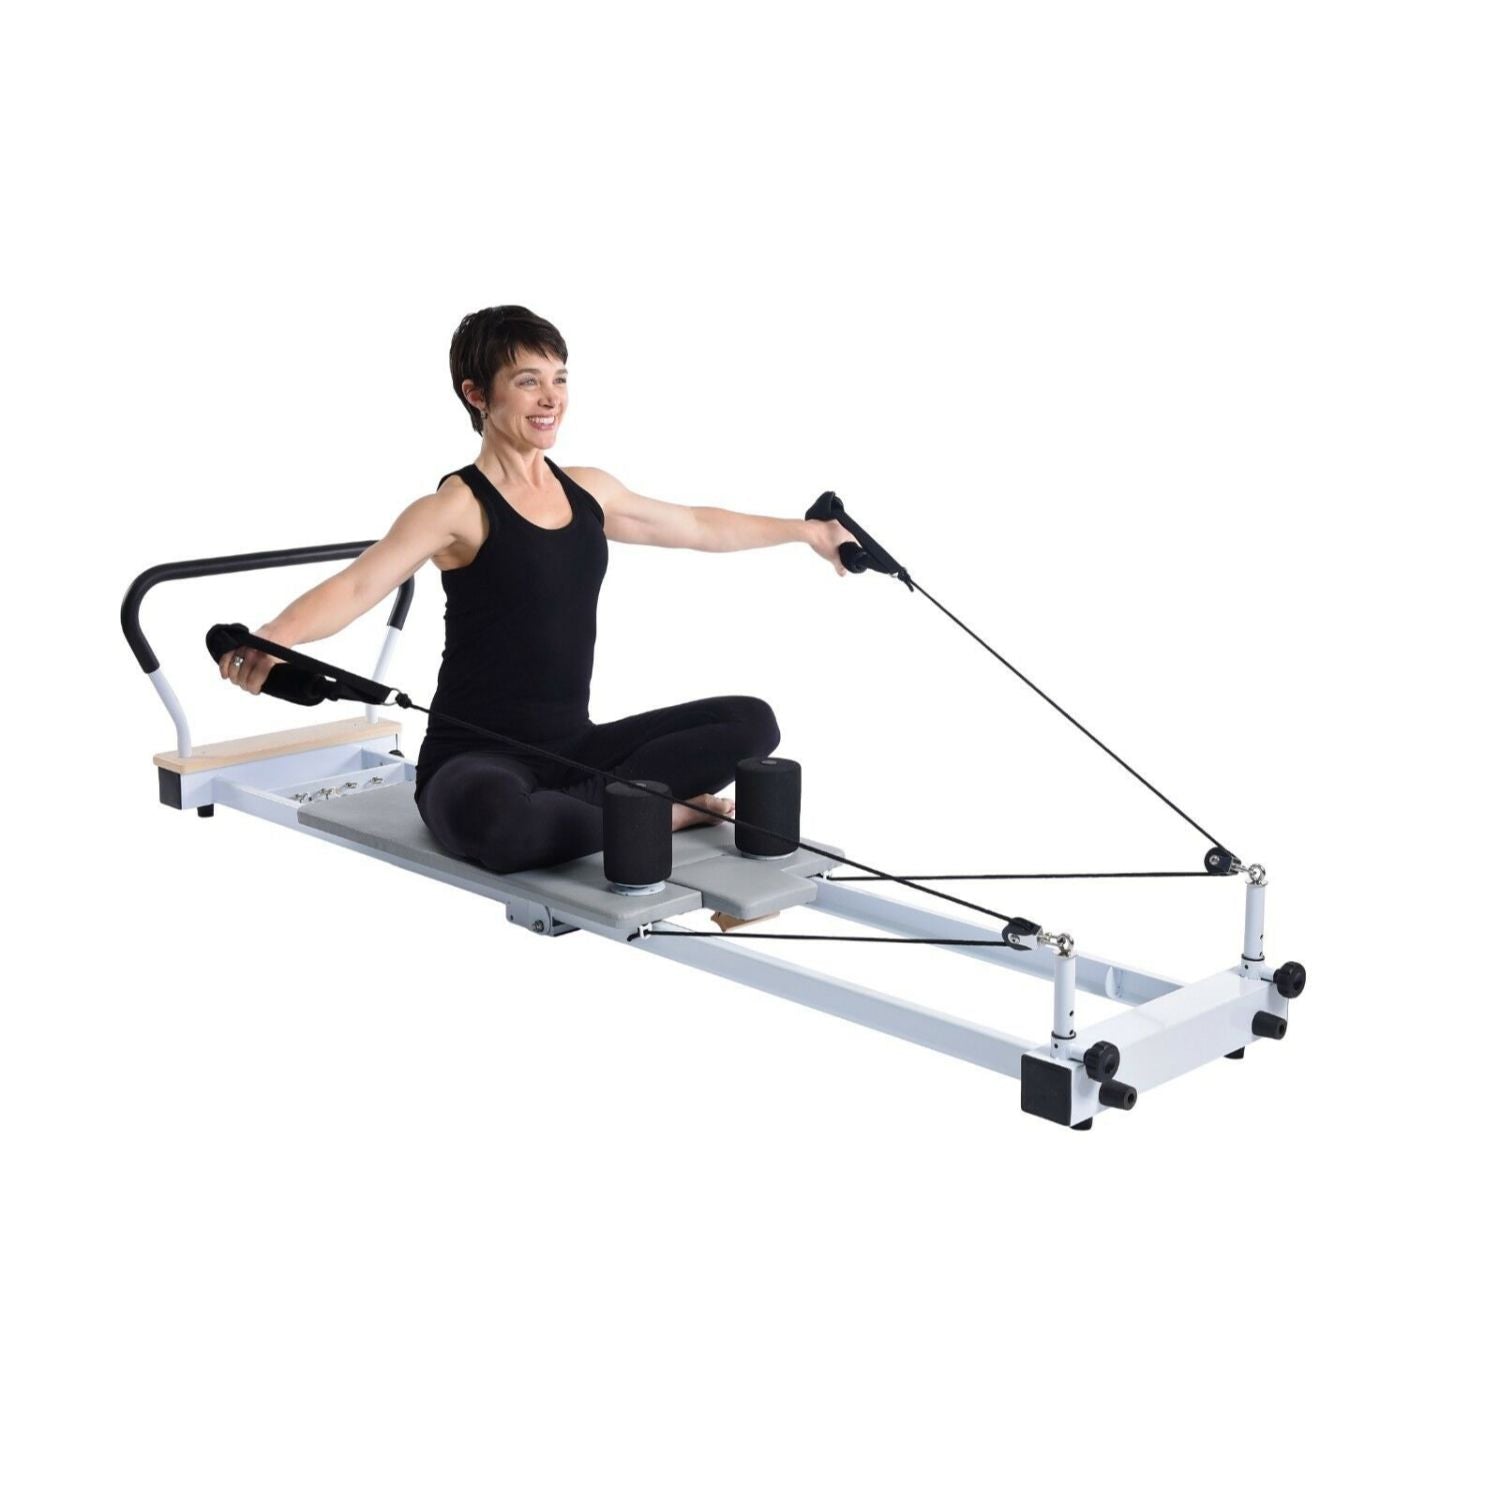 AeroPilates Precision Series Reformer 535 - Pilates Reformer Workout  Machine for Home Gym - Up to 350 lbs Weight Capacity